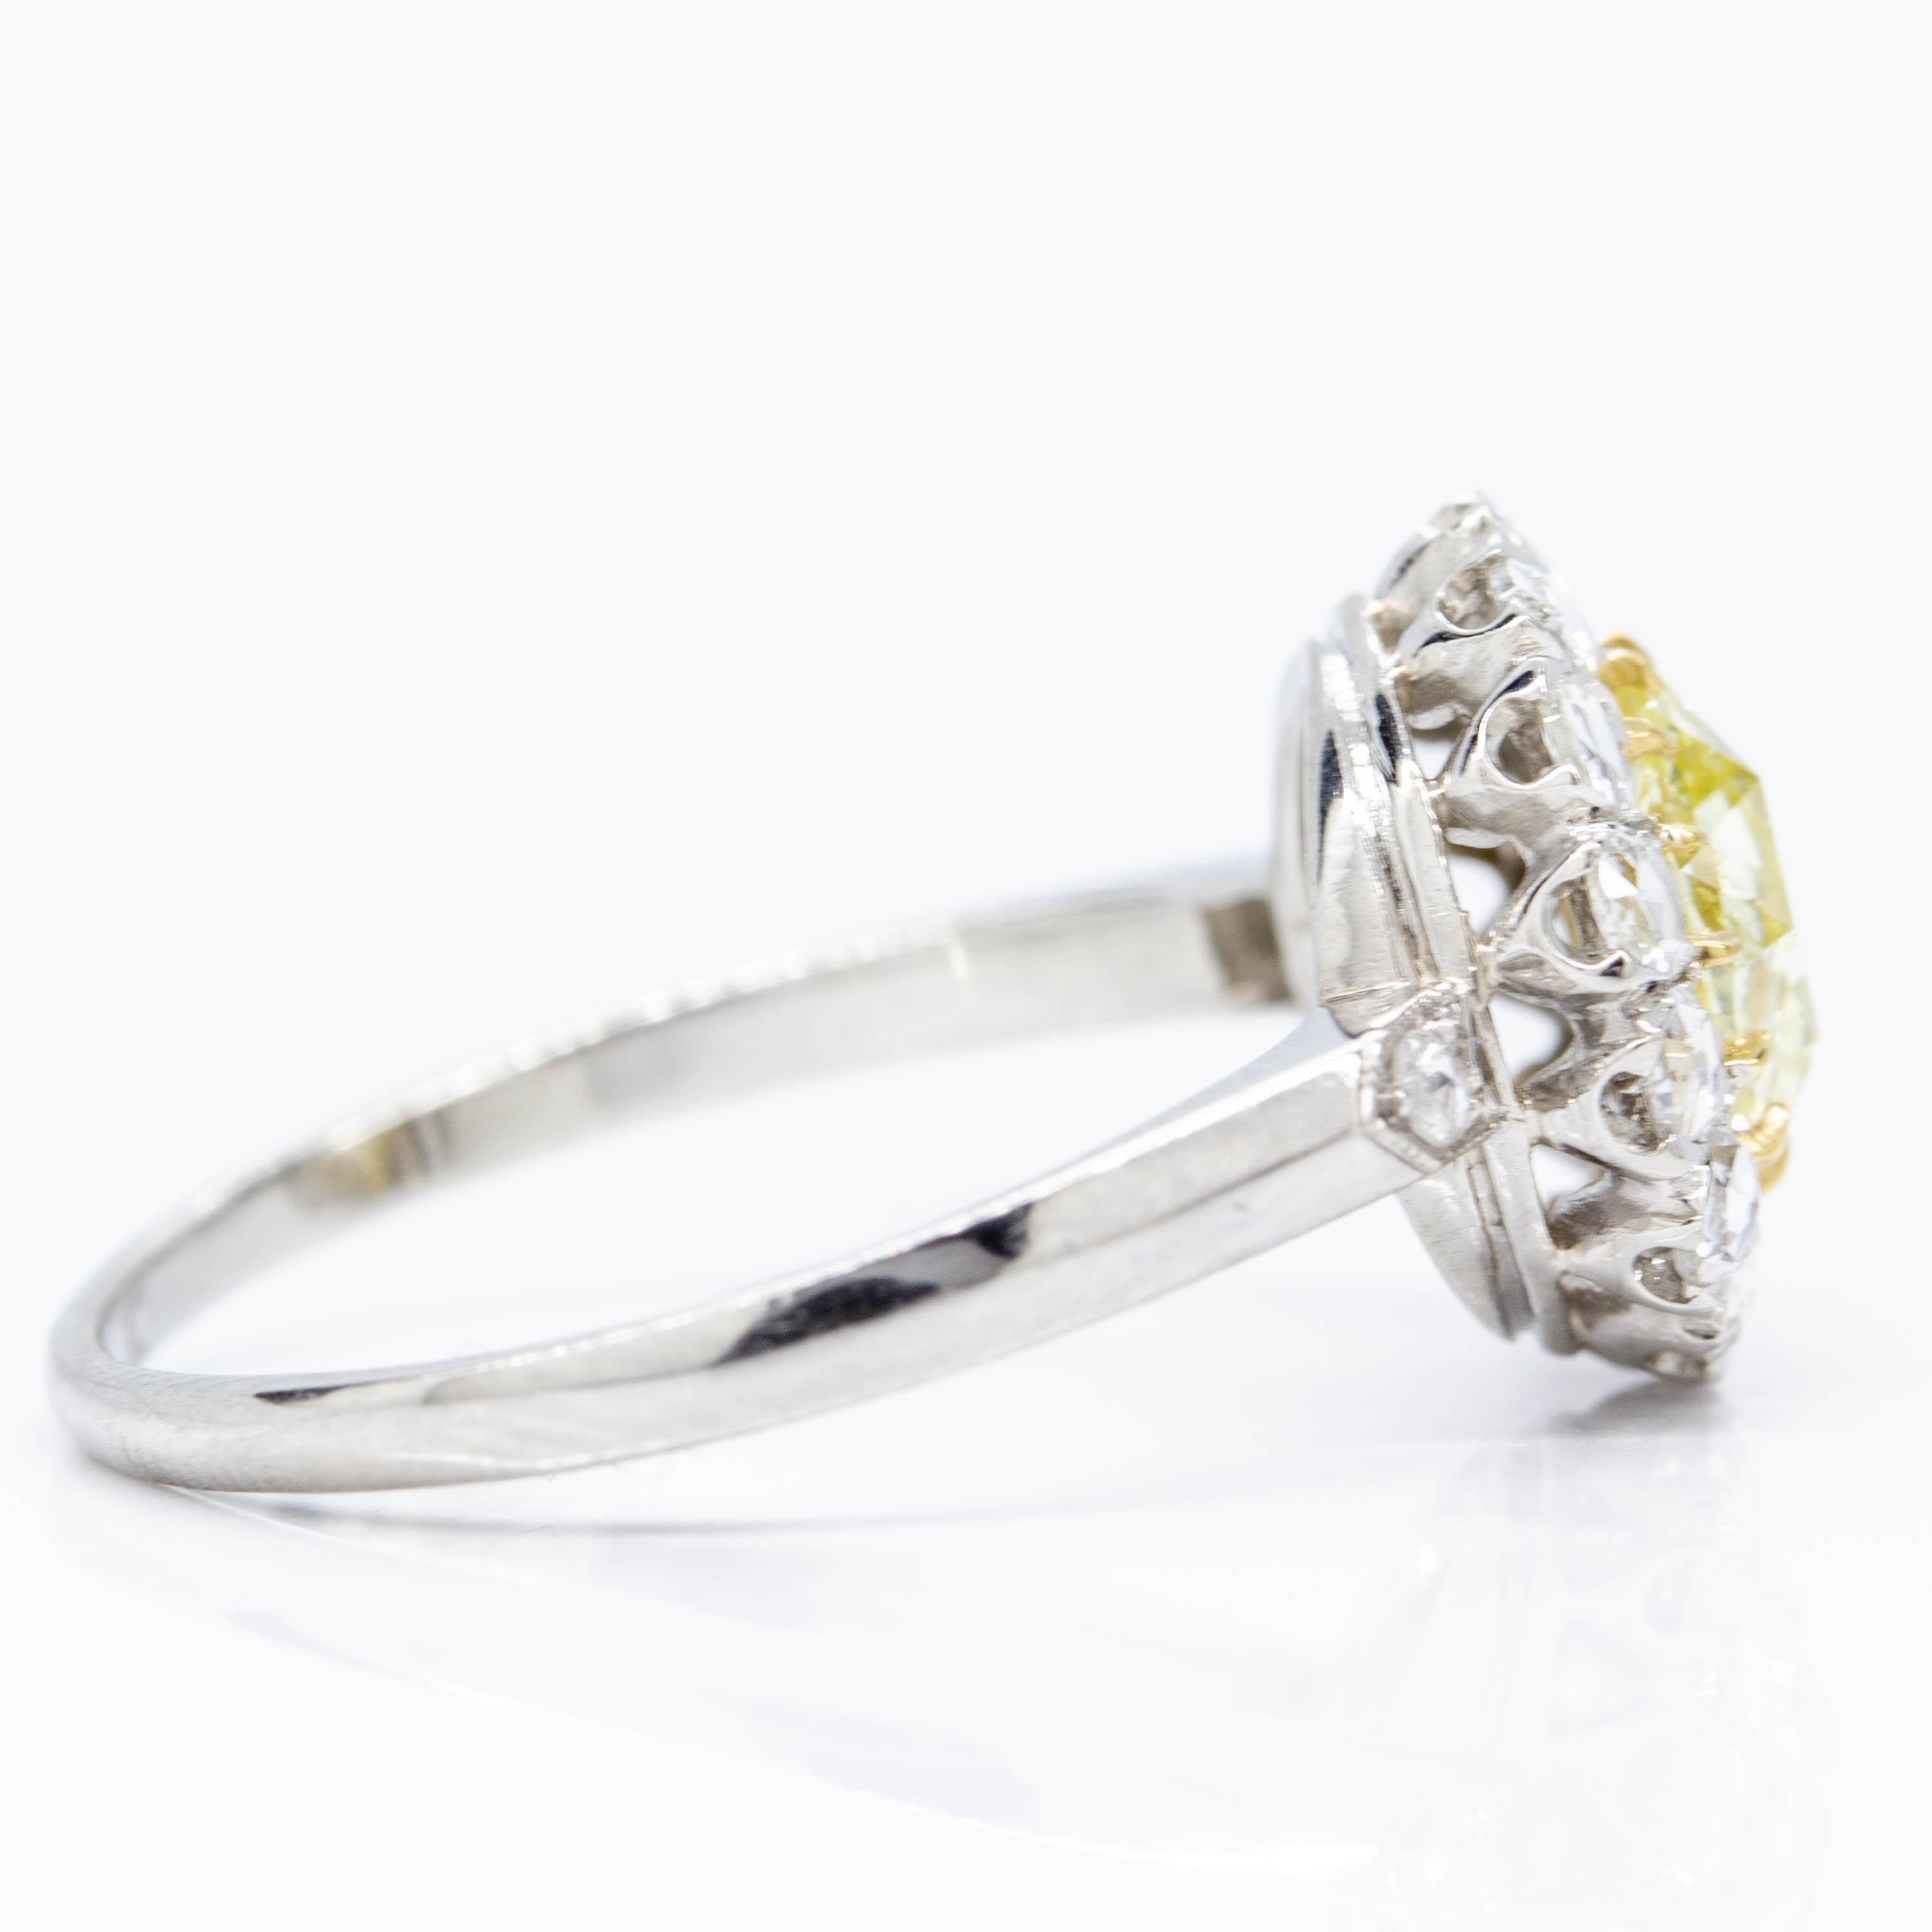 Composition: Platinum
•	1 rose cut diamond fancy yellow SI1 0.81ctw.
•	16 rose cut diamonds H-VS2 0.50ctw.
Ring size: 7
Ring face measure: 12mm by 12mm
Rise above finger: 6mm
Total weight:  4.2grams – 2.5dwt
